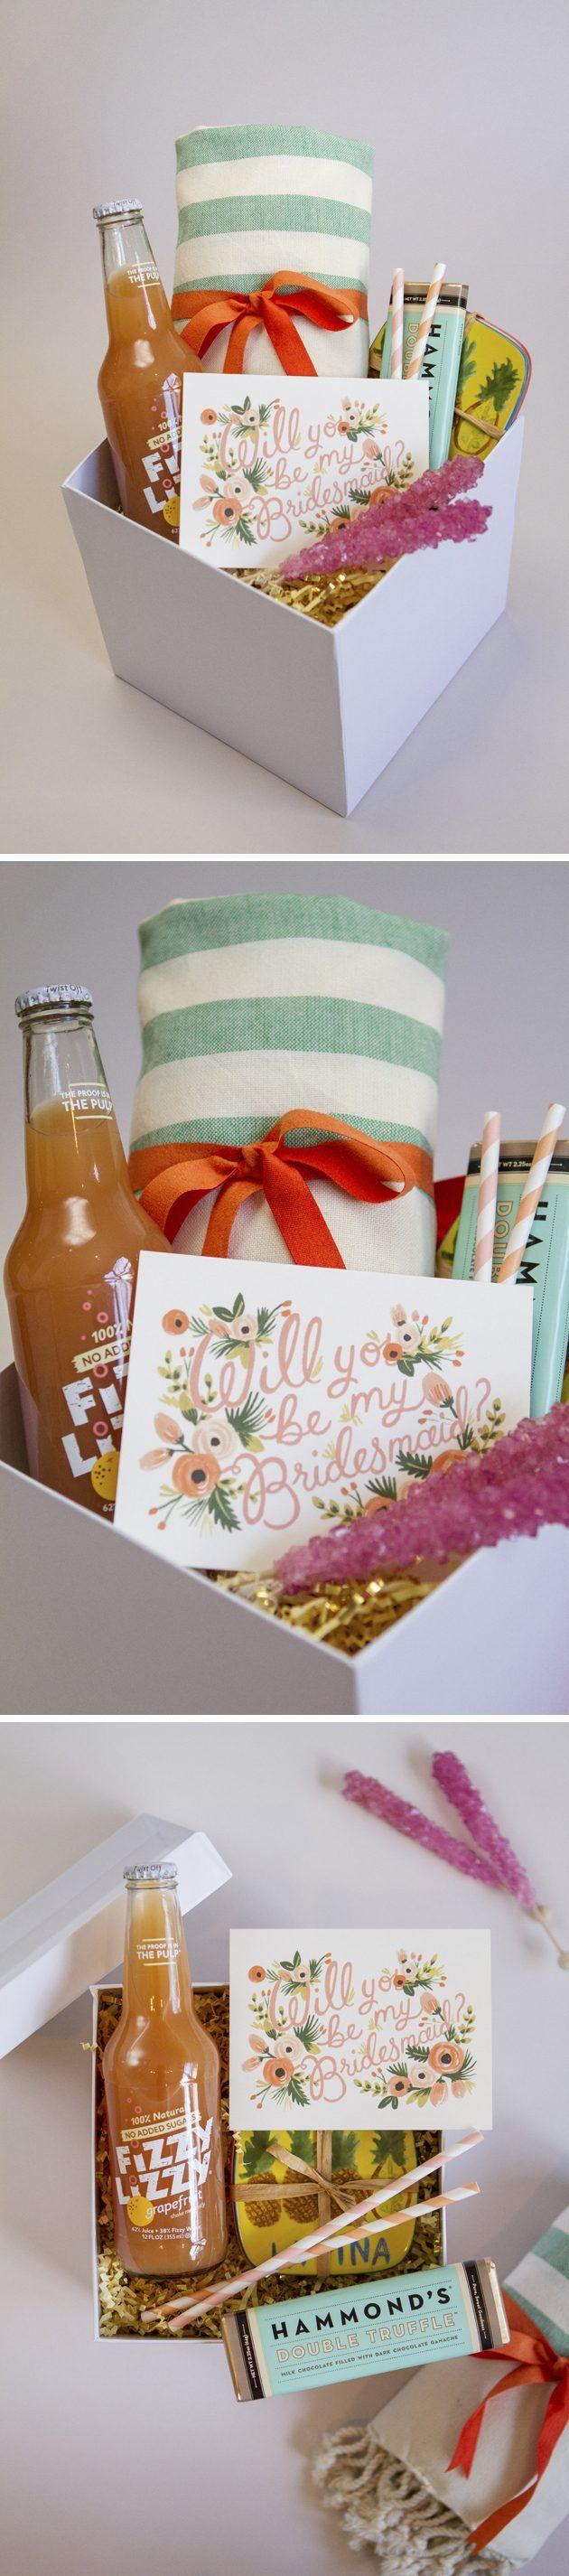 Wedding - How To Make A "Will You Be My Bridesmaid?" Box